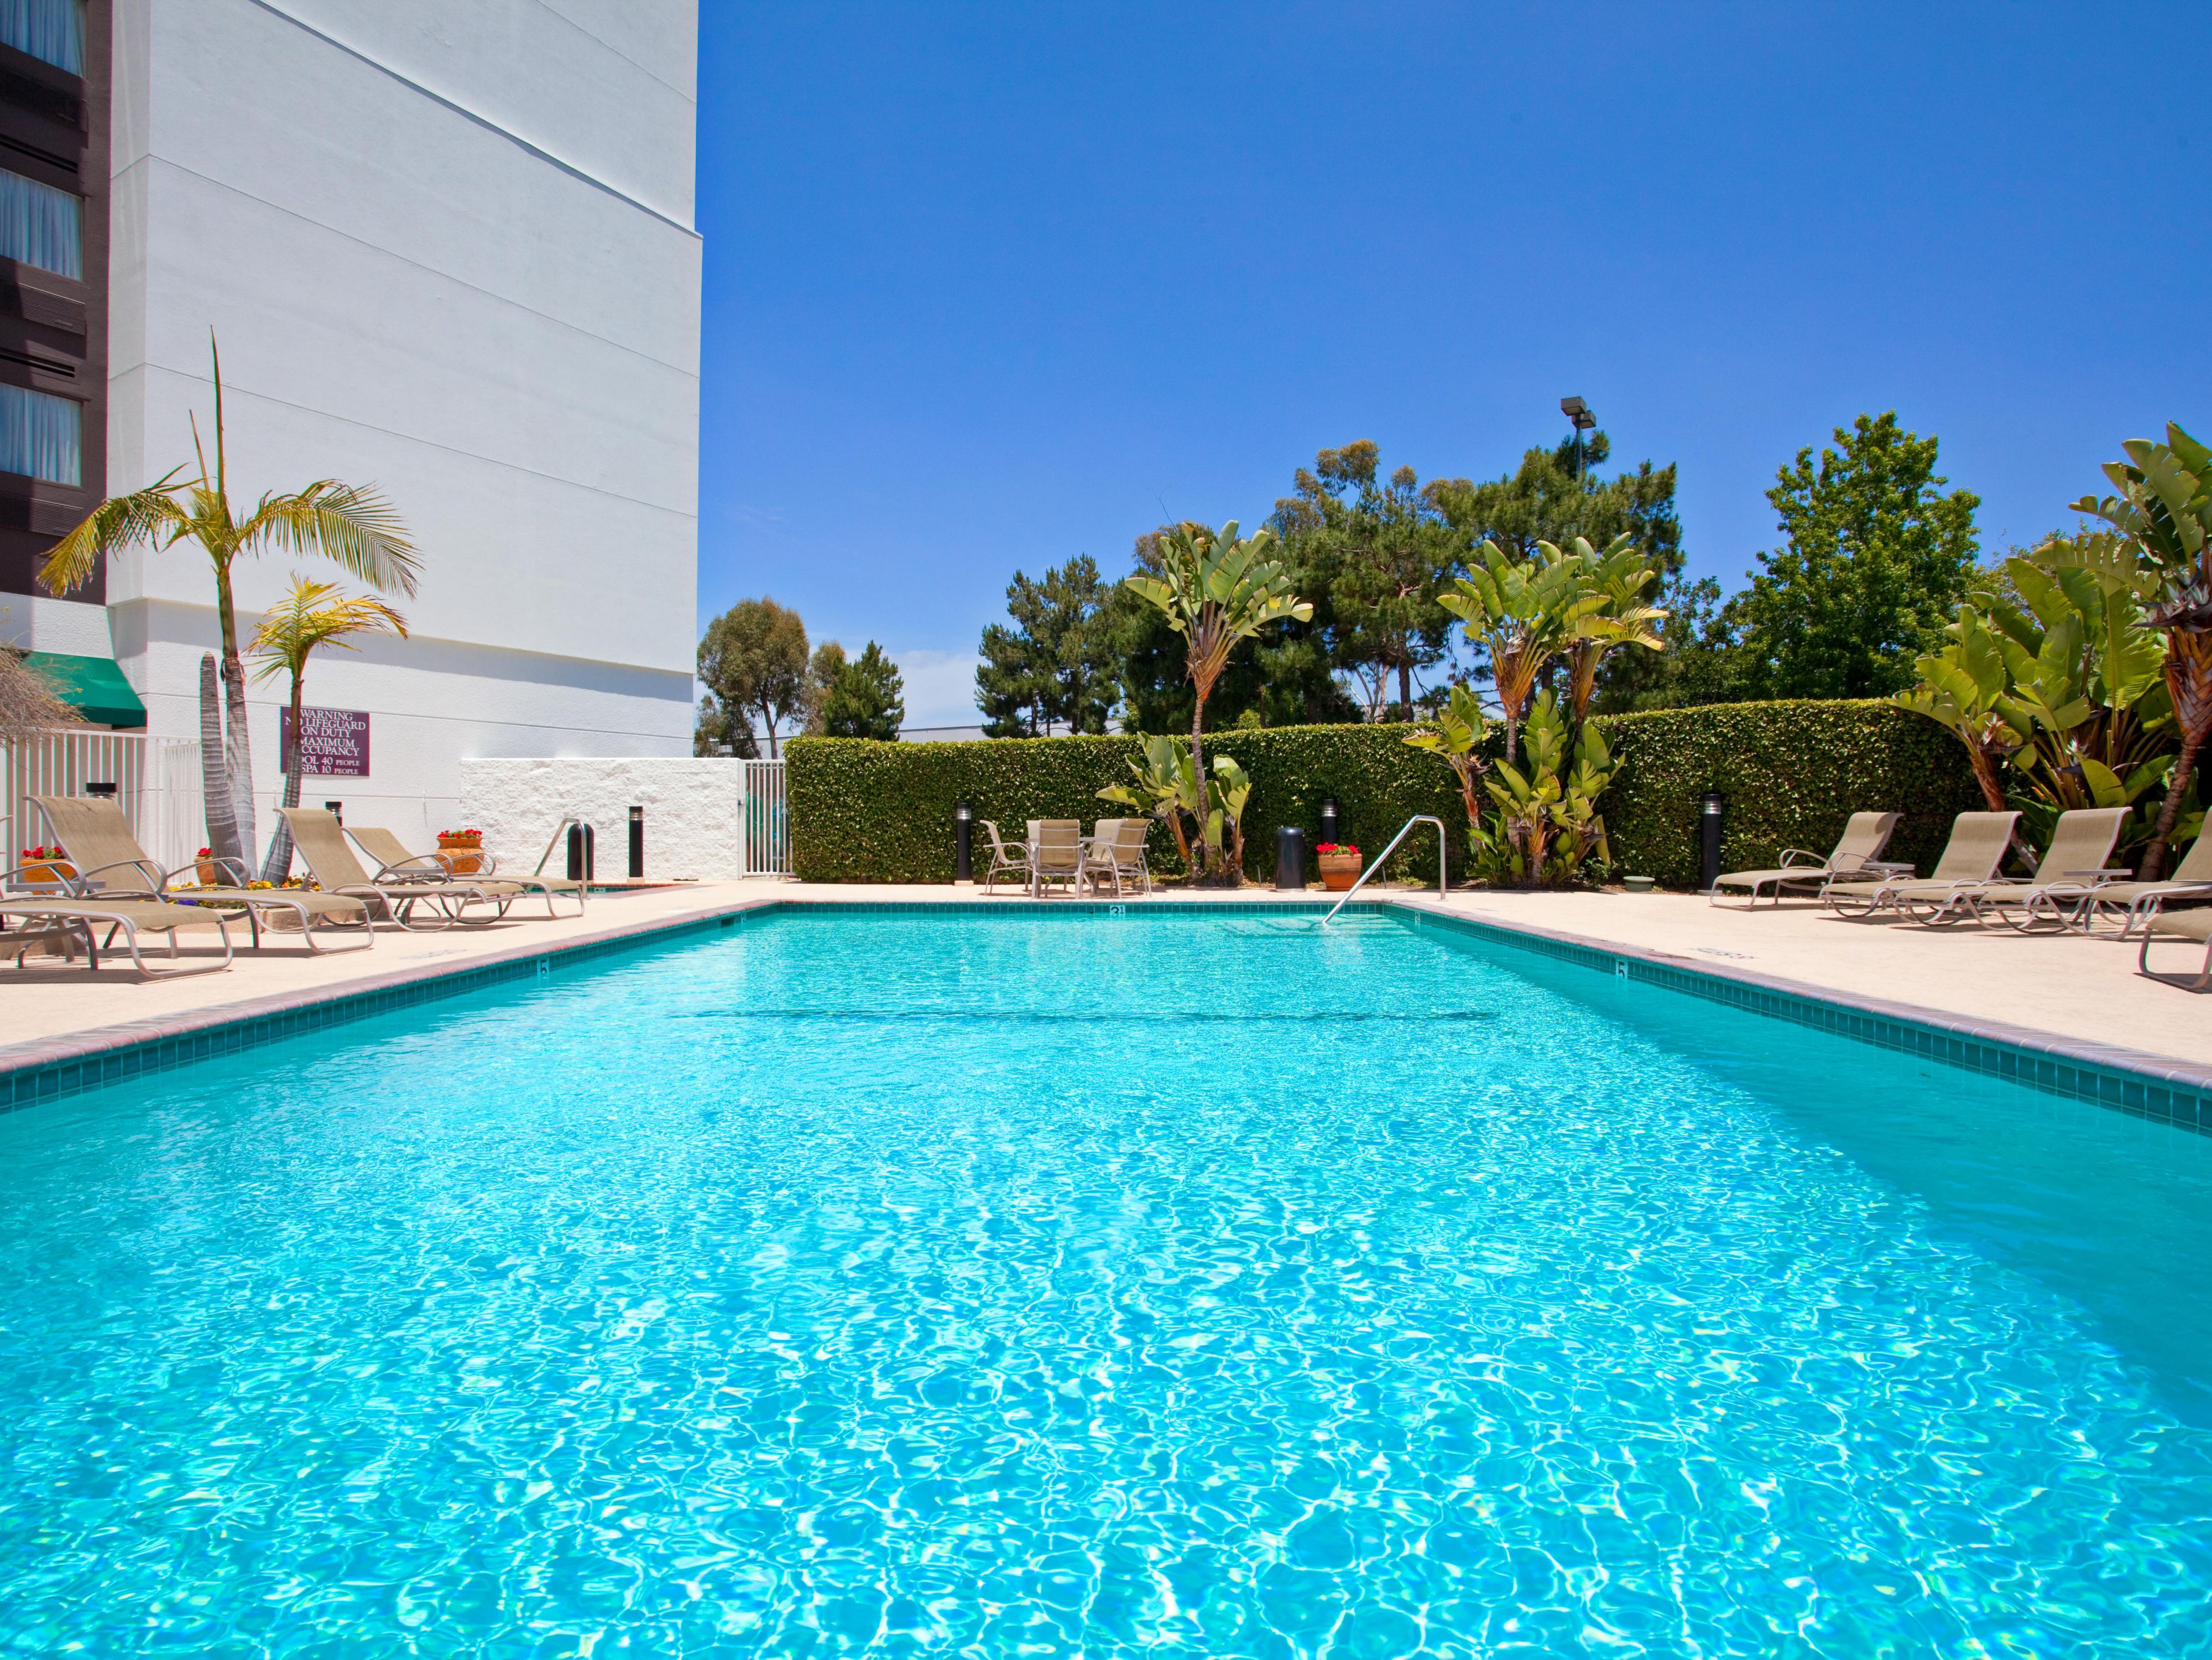 While you are here with us, unwind by the poolside or enjoy a swim in the heated pool and hot tub.